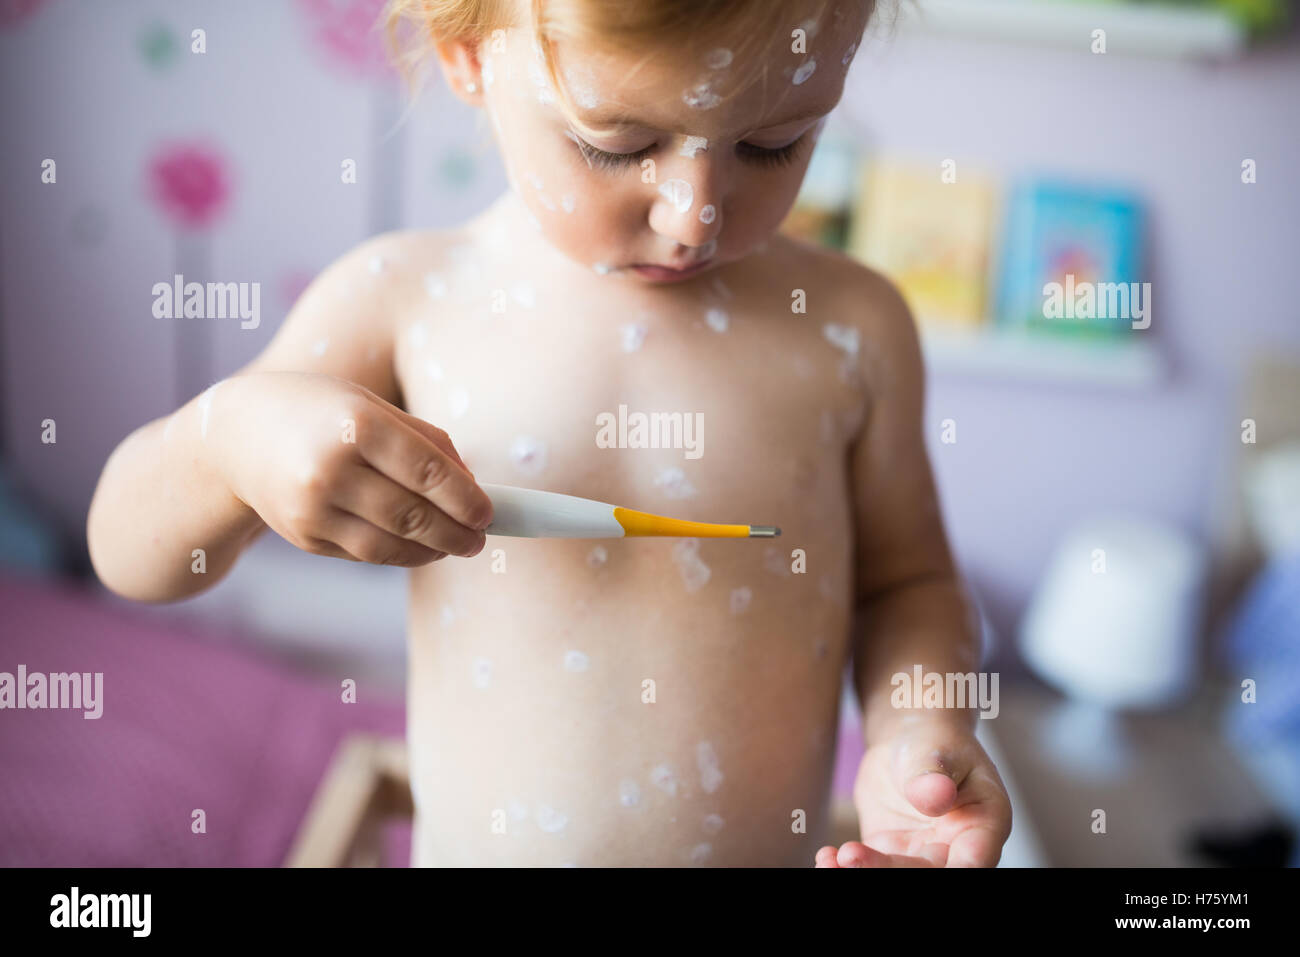 Beautiful little girl with chickenpox, holding thermometer Stock Photo